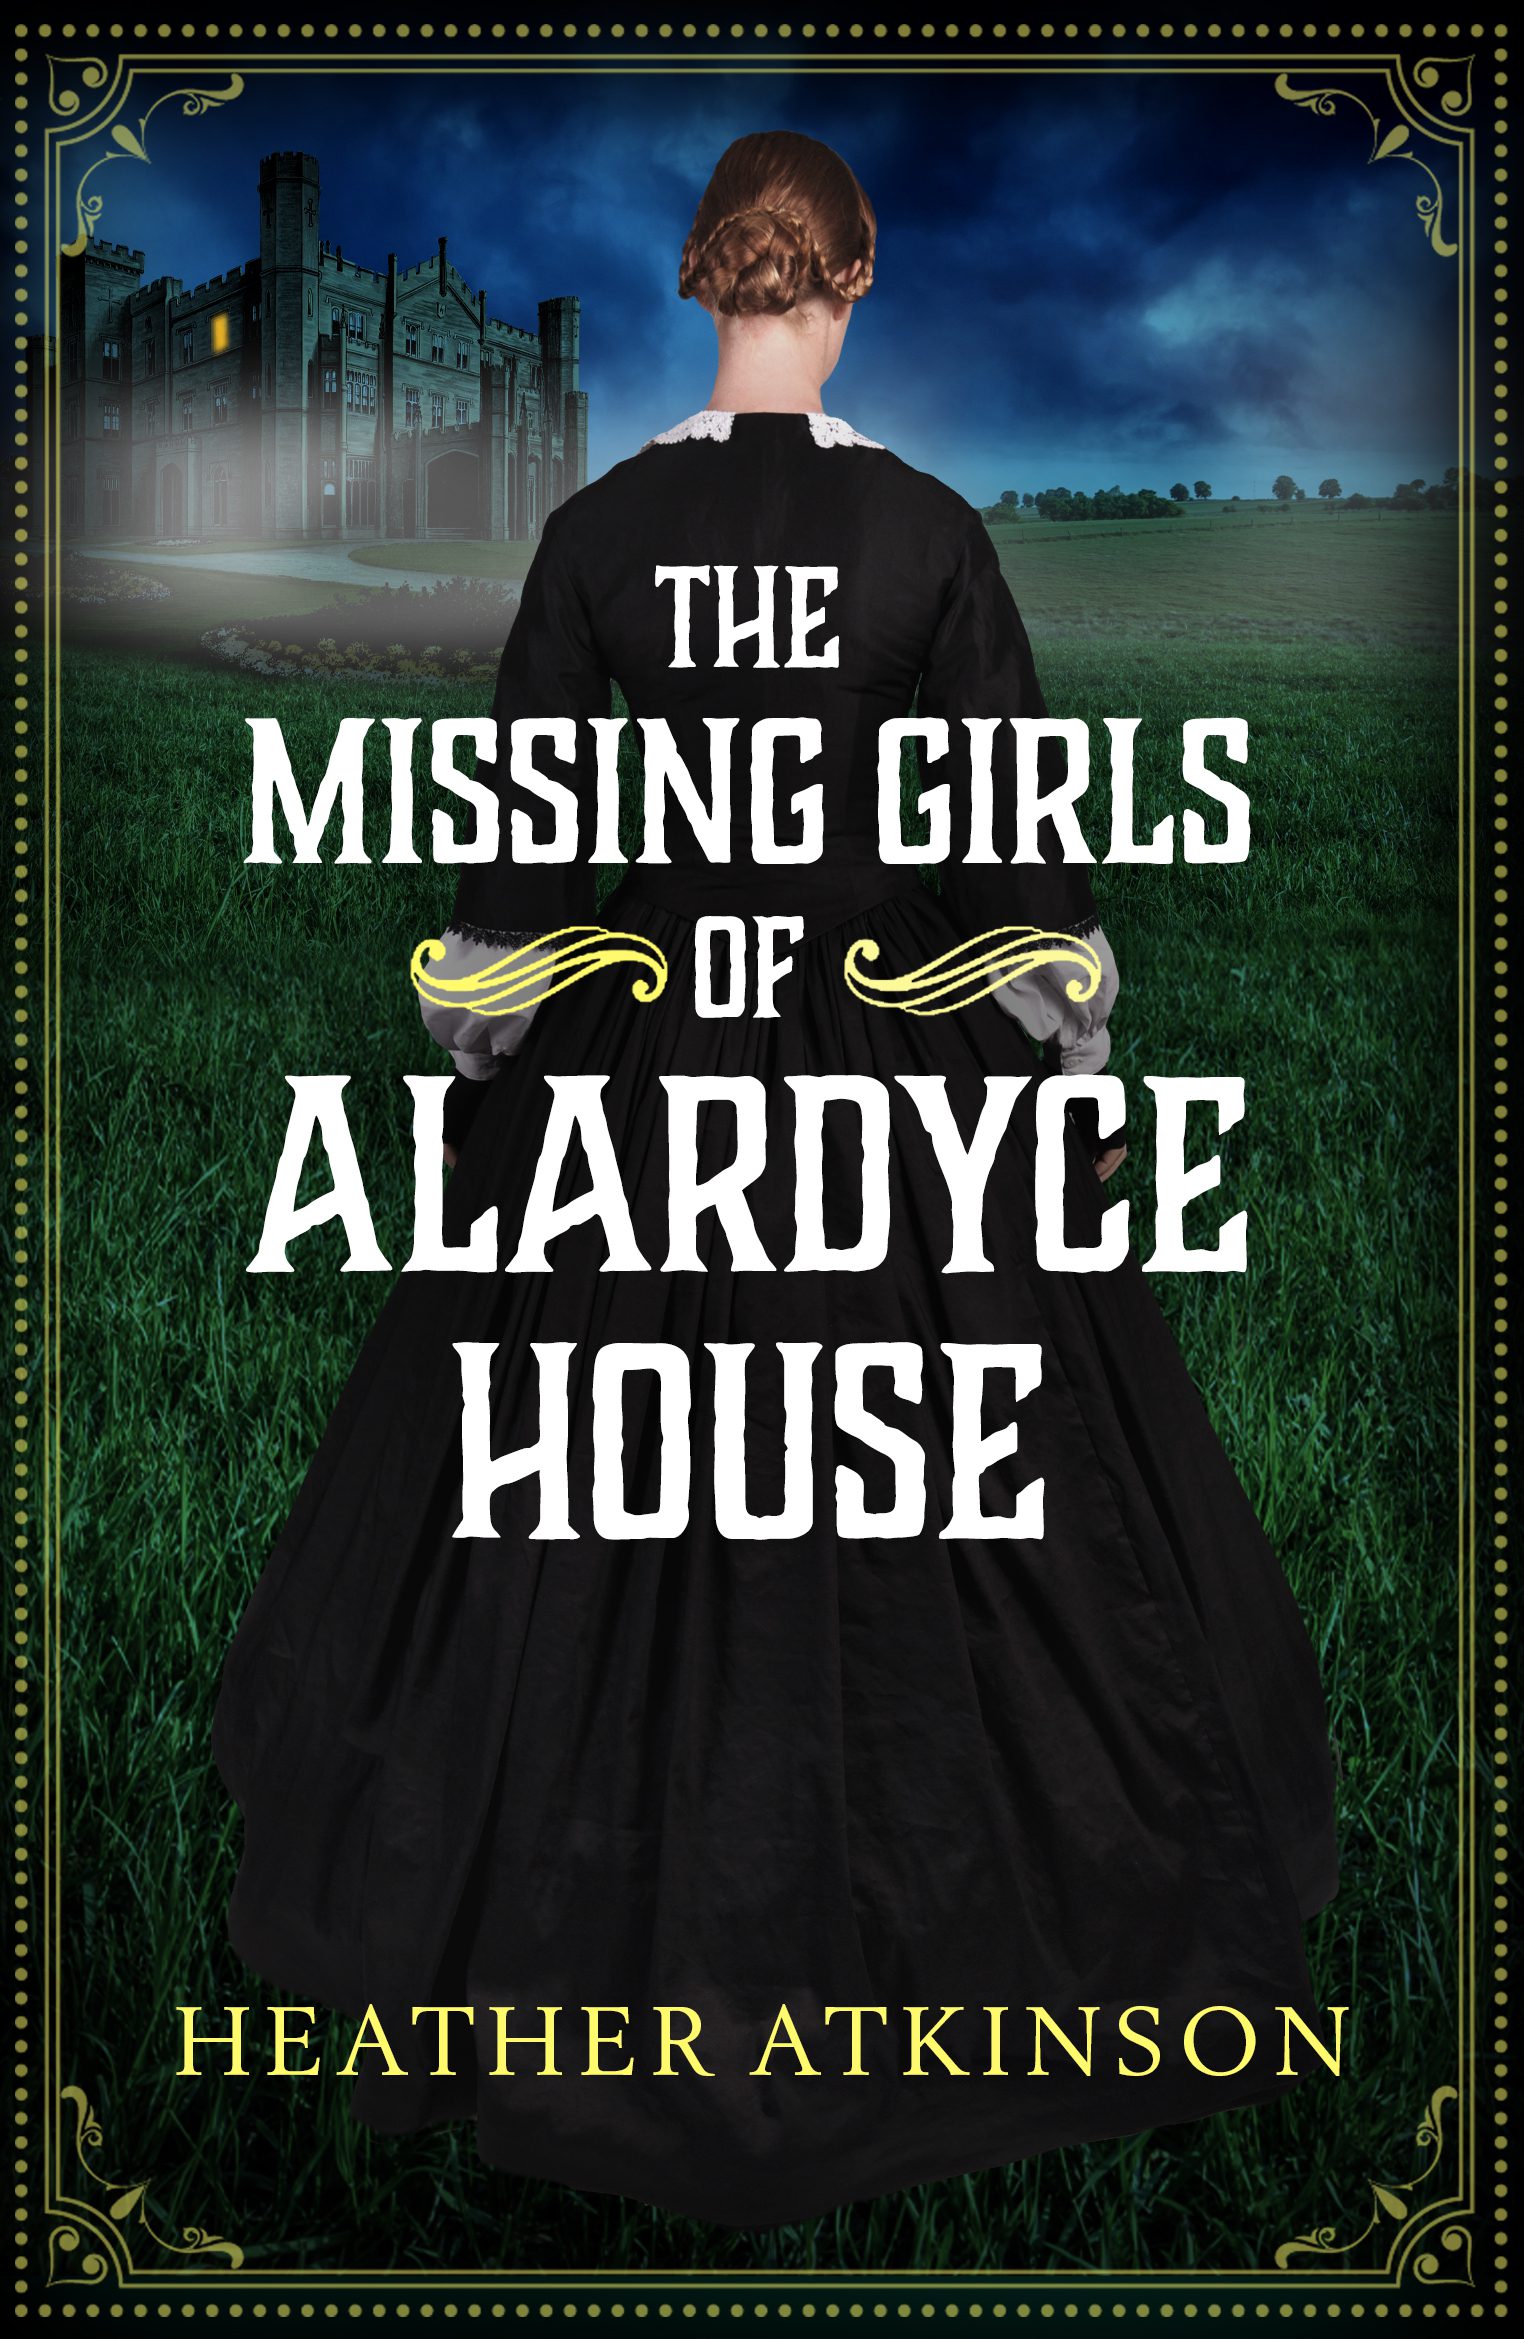 The Missing Girls of Alardyce House book cover